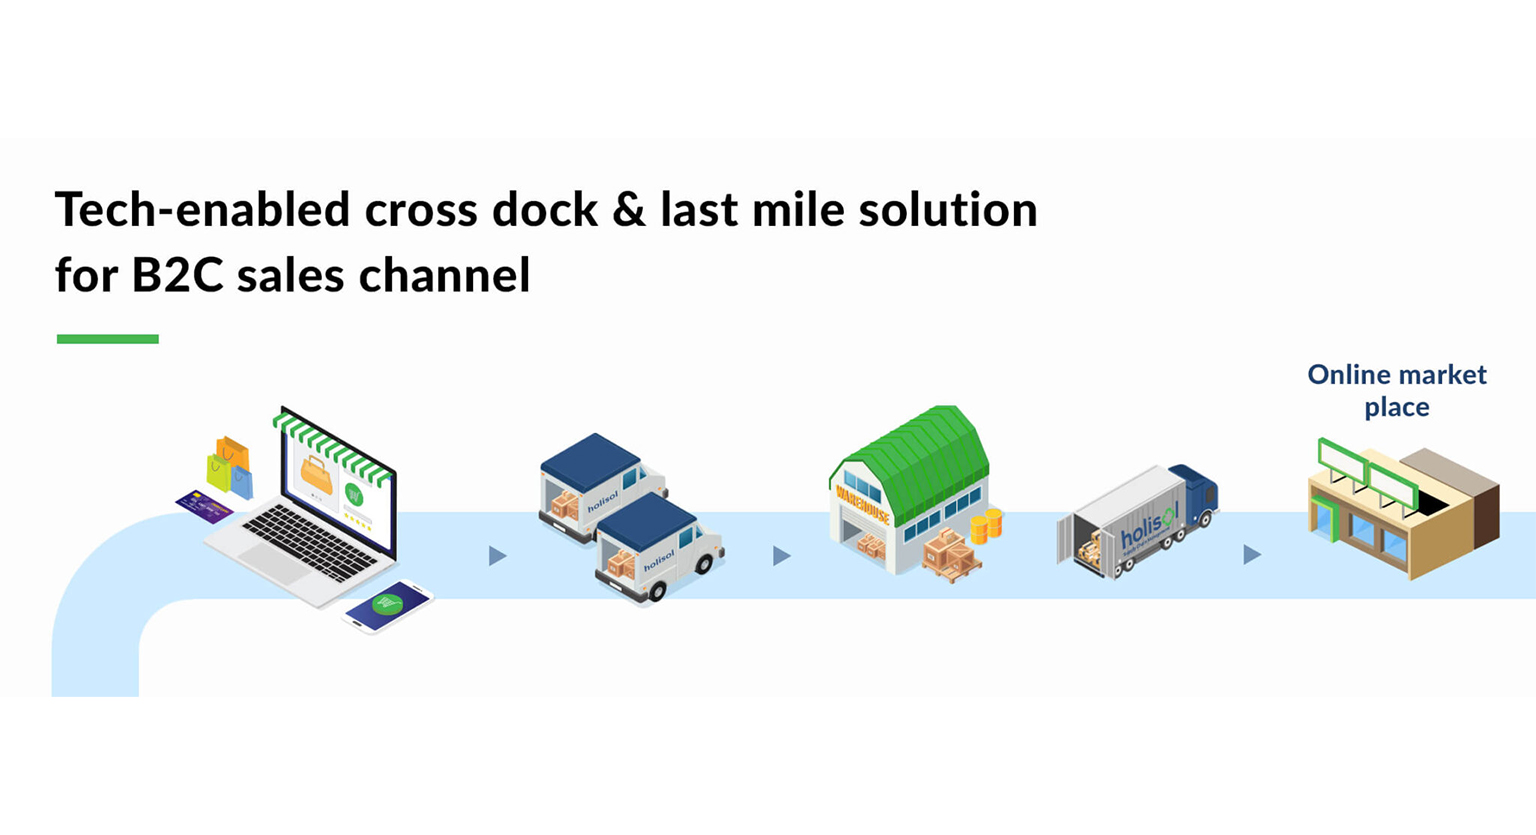 Tech-enabled cross dock & last mile solution for B2C sales channel